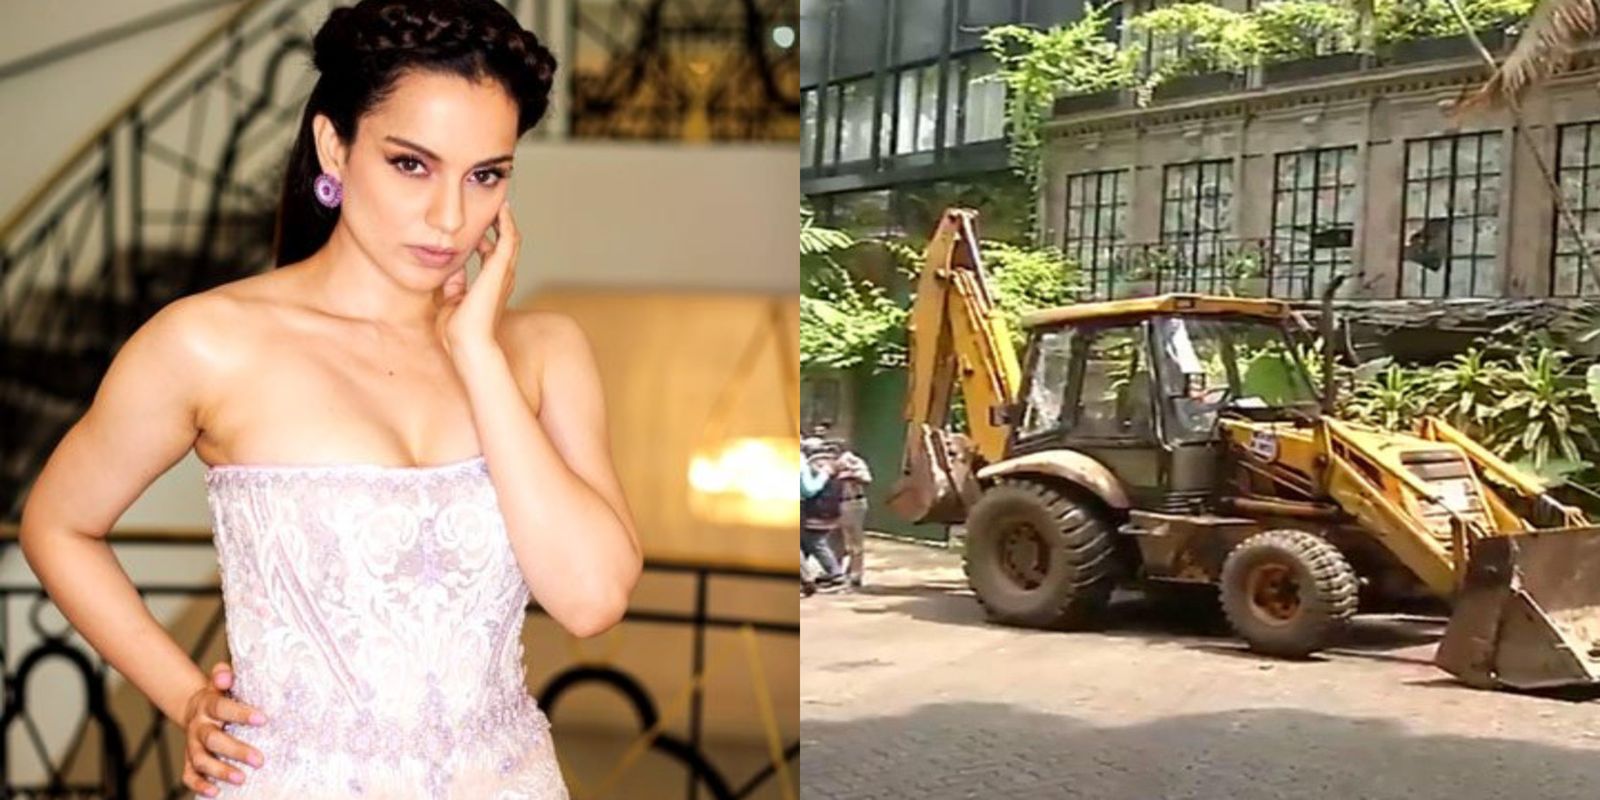 Kangana Ranaut Seeks Rs 2 Crores In Damages From BMC, Claims 40 Percent Of Her Bungalow Demolished In New Petition